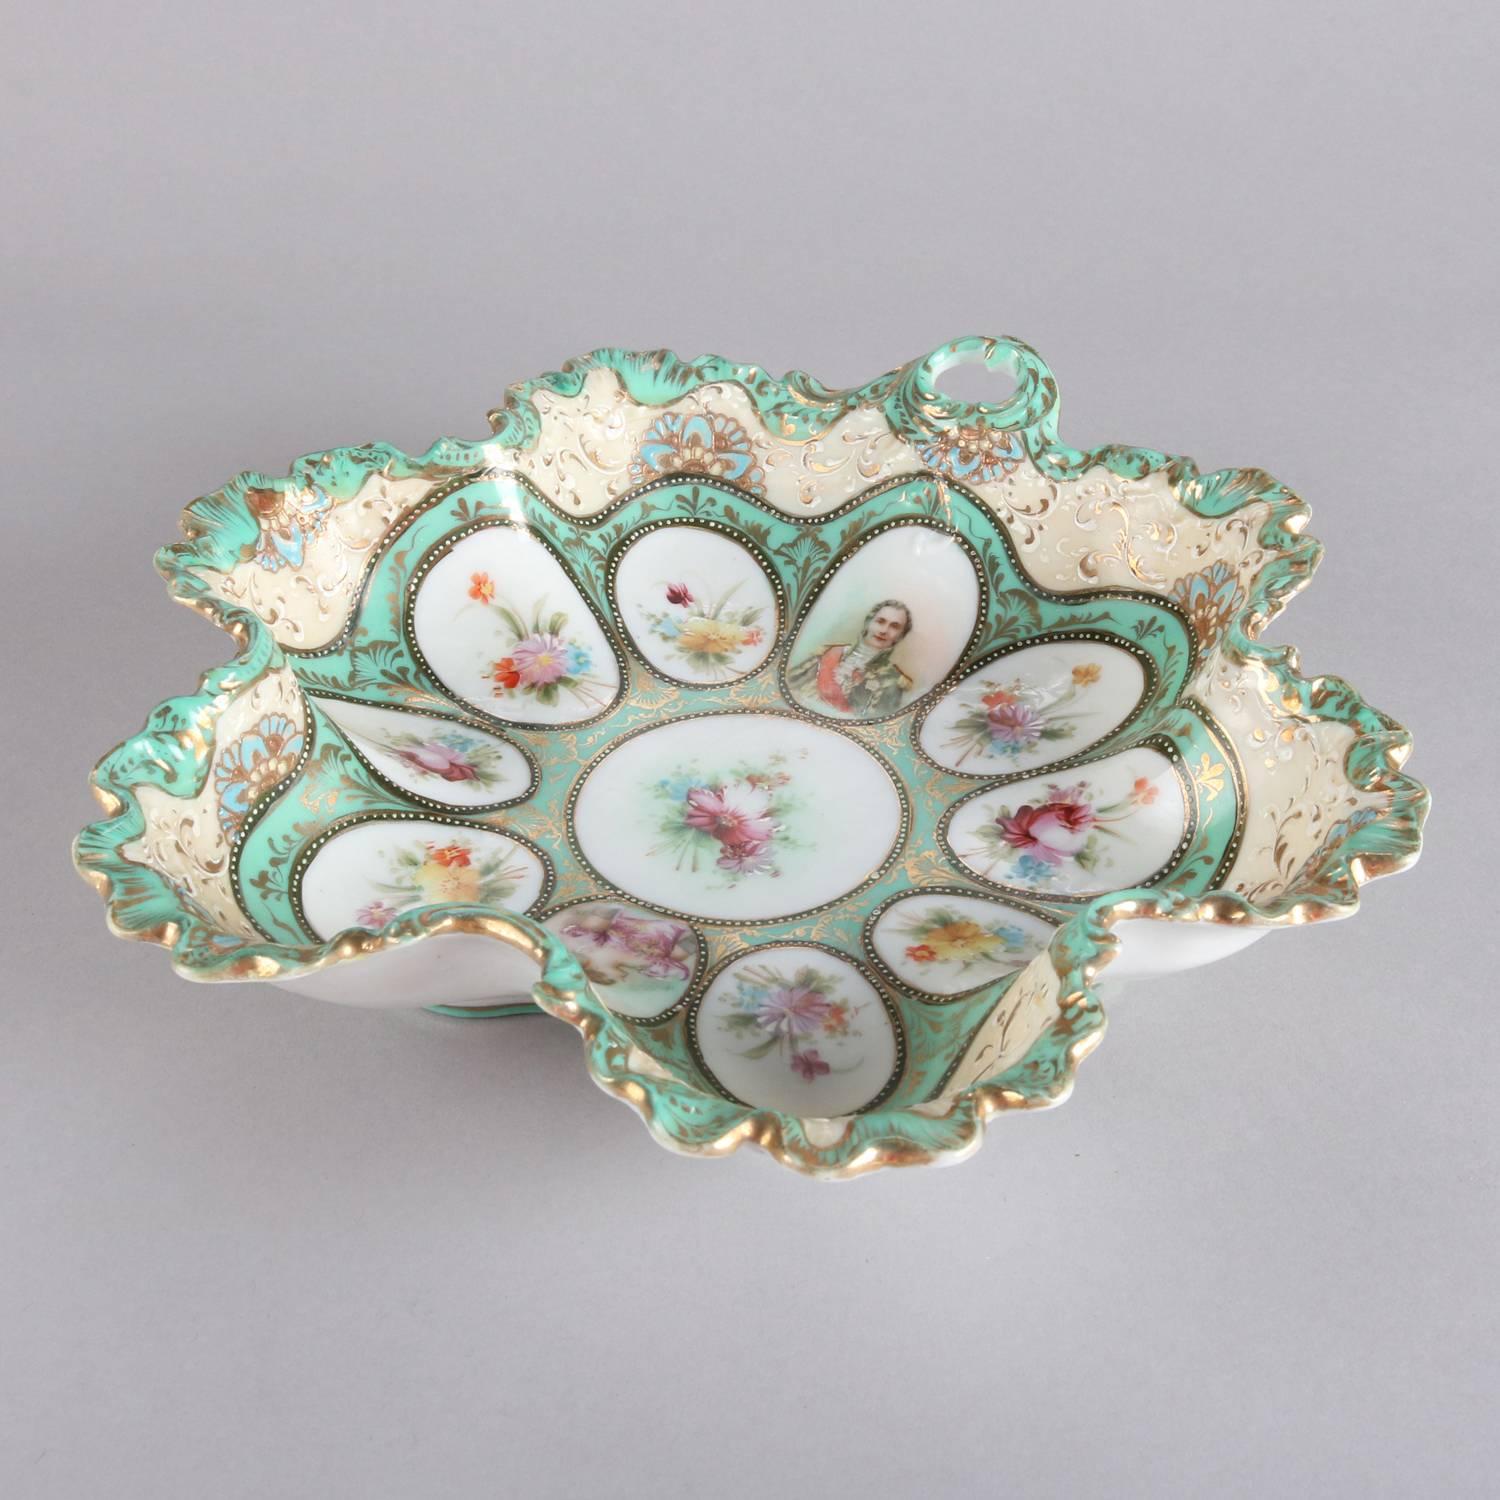 Antique Sevres School porcelain handled center bowl features ruffled form with hand-painted cameo portraits and floral reserves with gilt highlights, en verso floral decorations, 19th century

Measures - 2